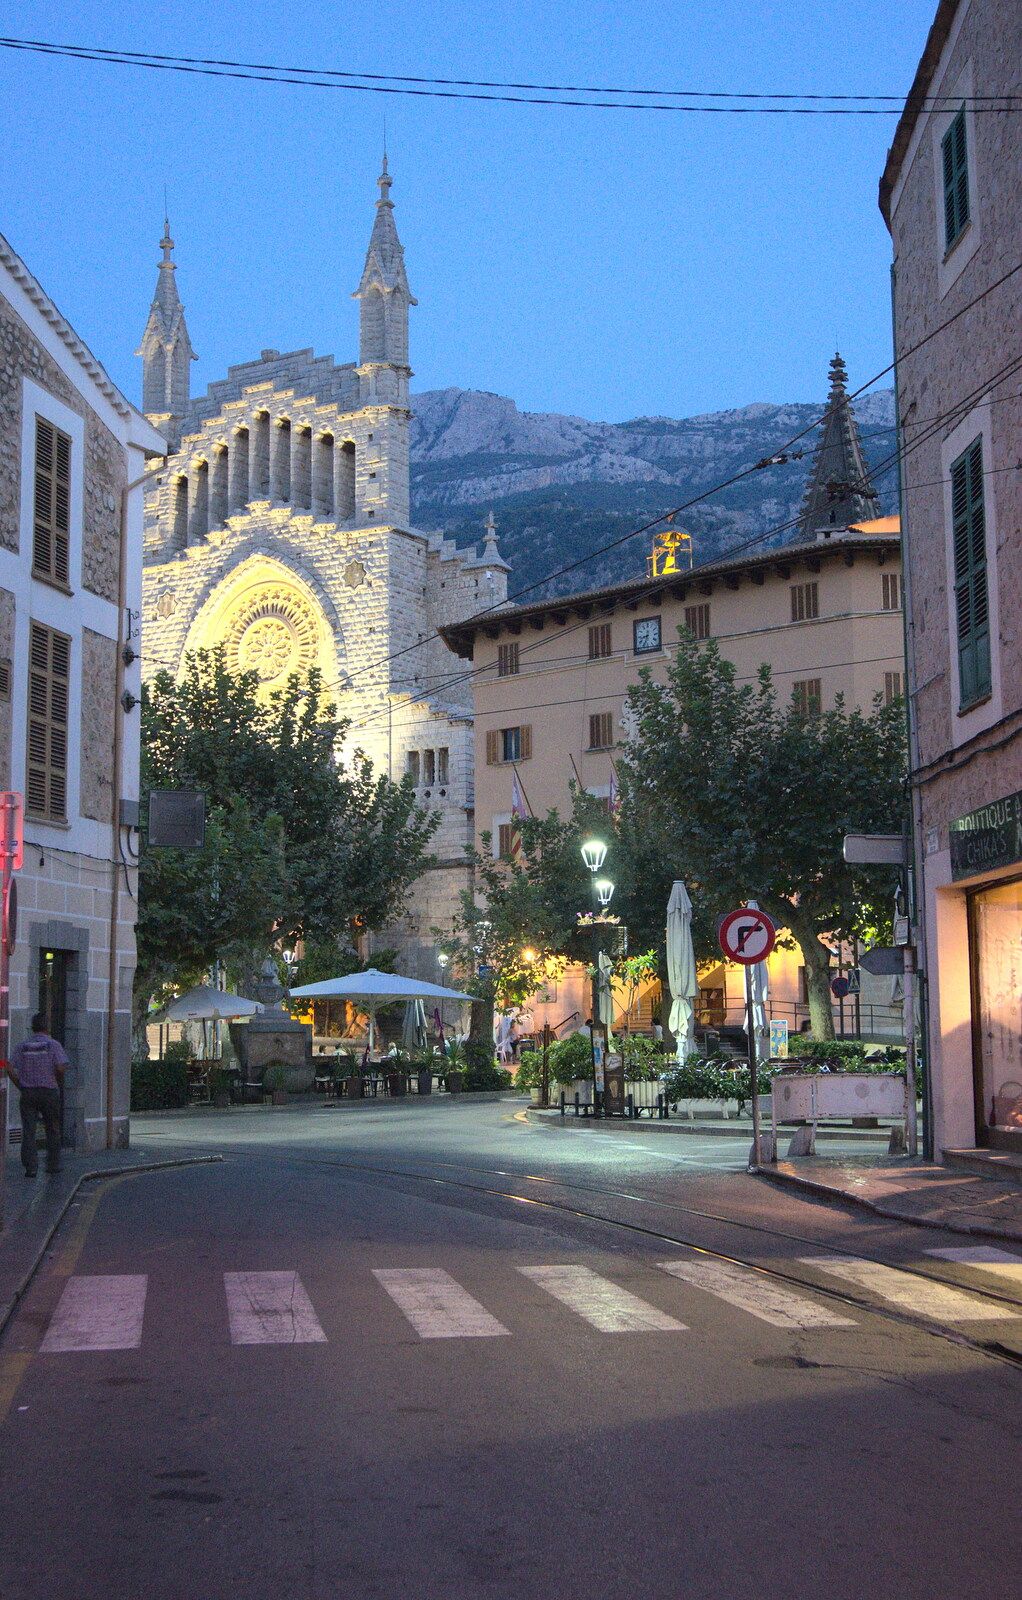 Downtown Sóller in the evening light from A Trip to Sóller, Mallorca, Spain - 8th-14th September 2012